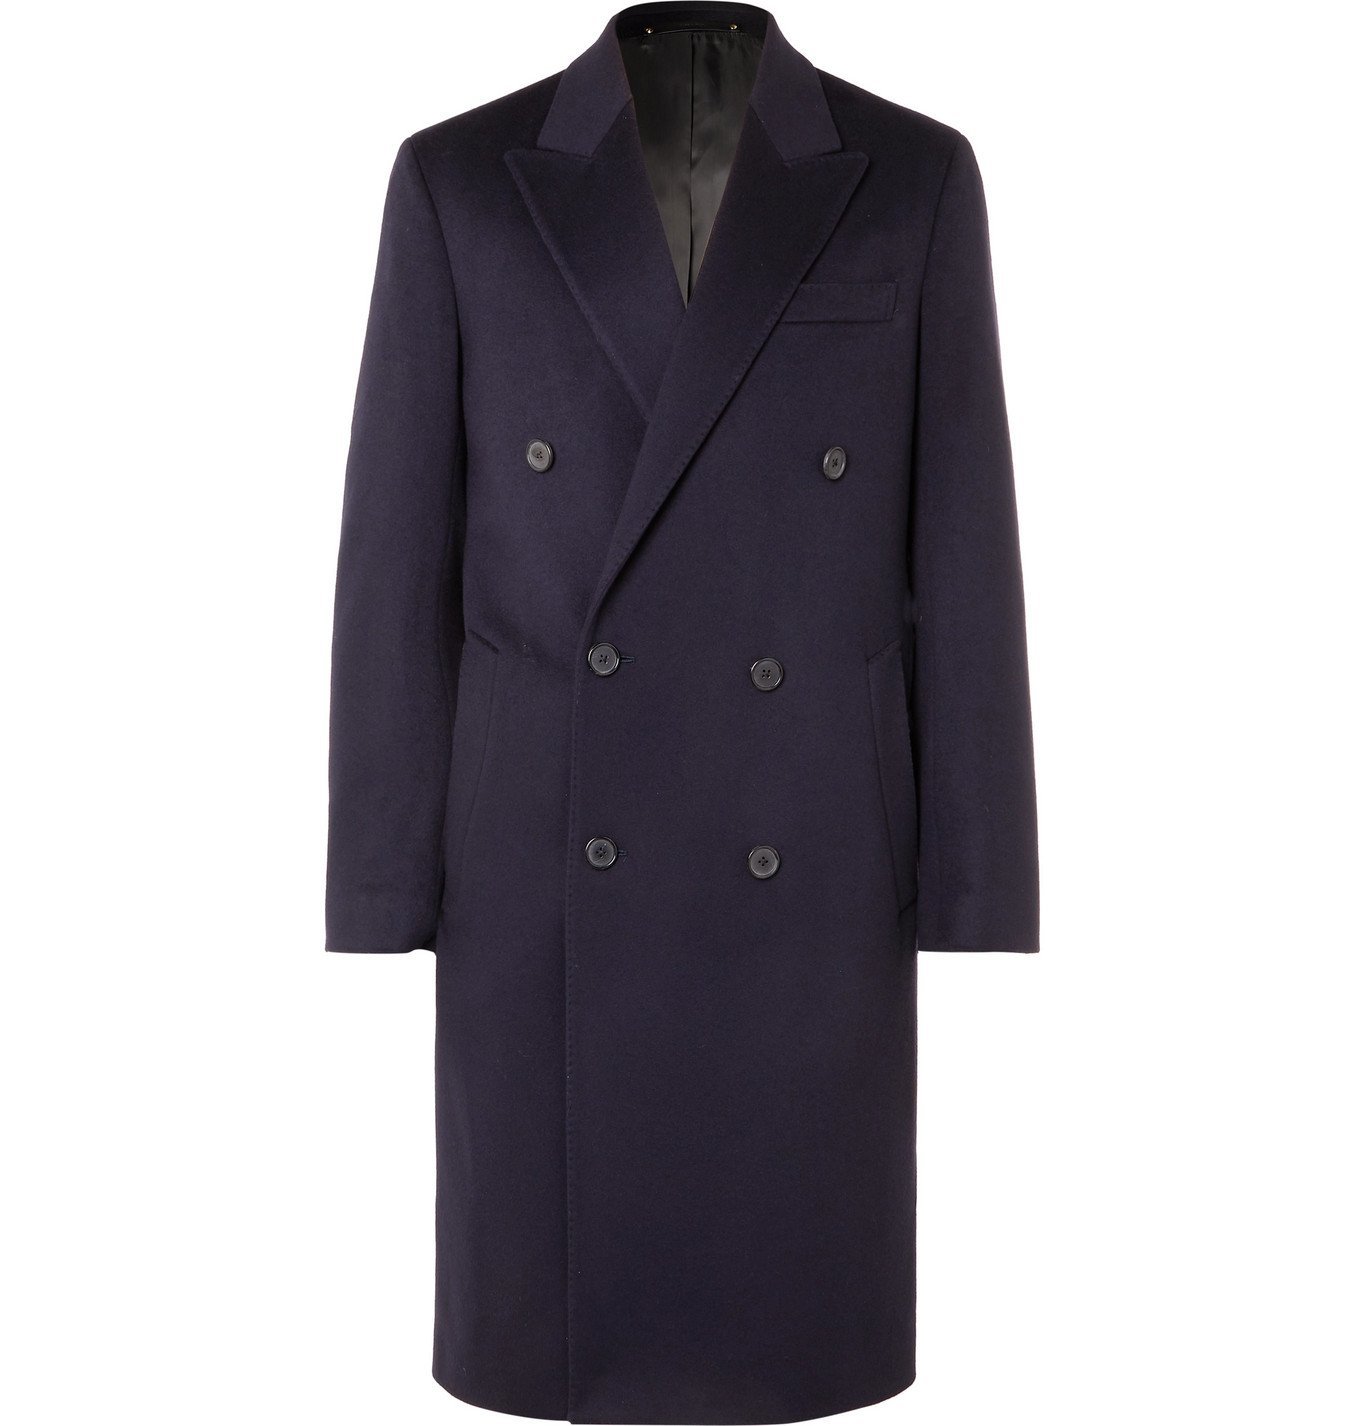 Paul Smith - Double-Breasted Wool and Cashmere-Blend Coat - Blue Paul Smith